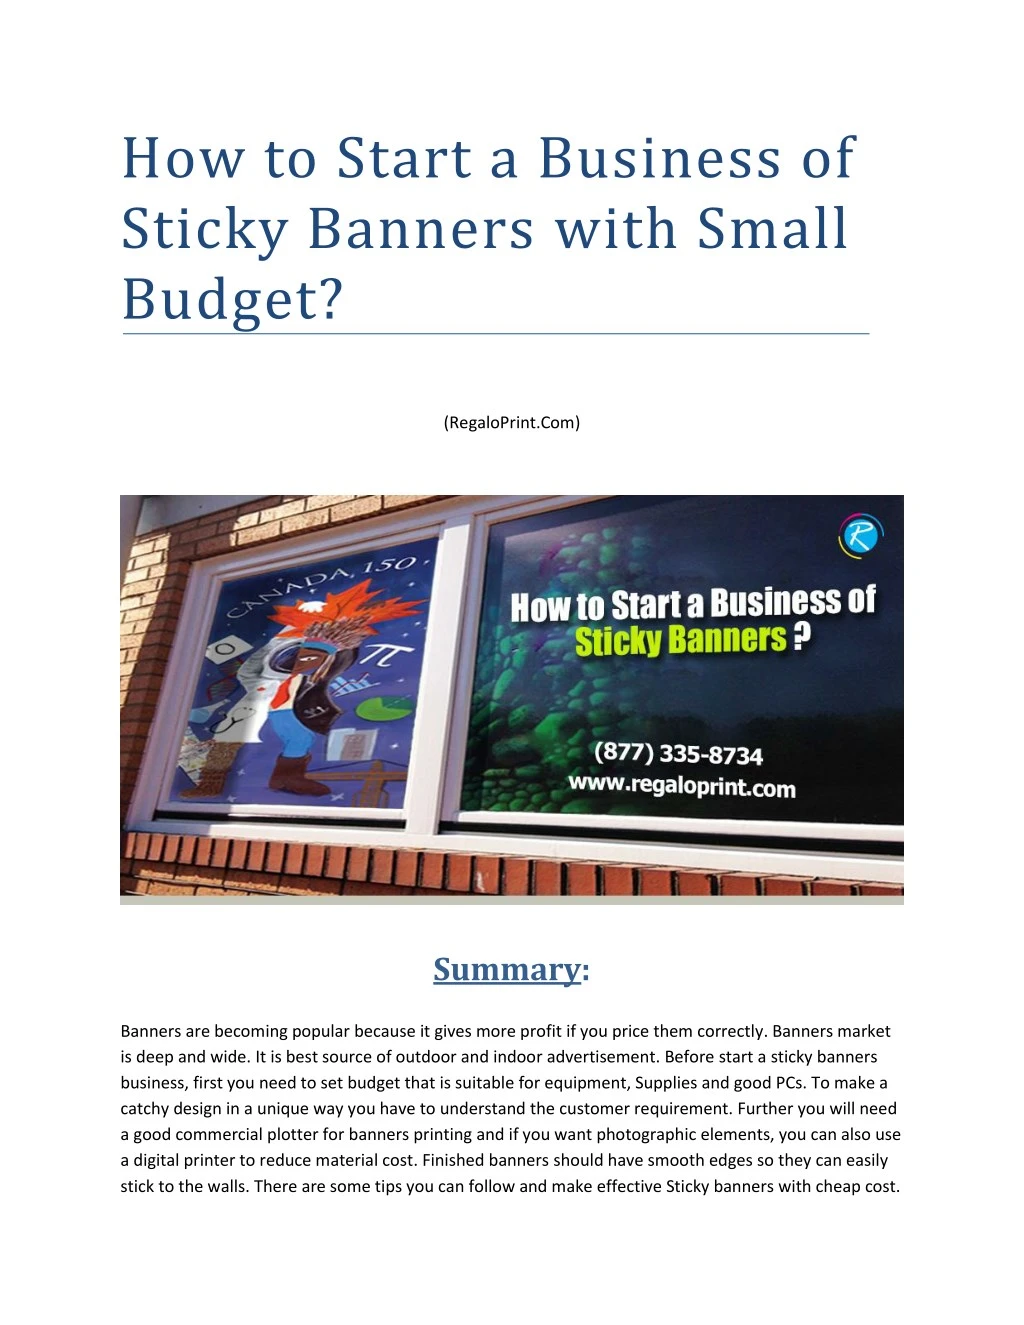 how to start a business of sticky banners with